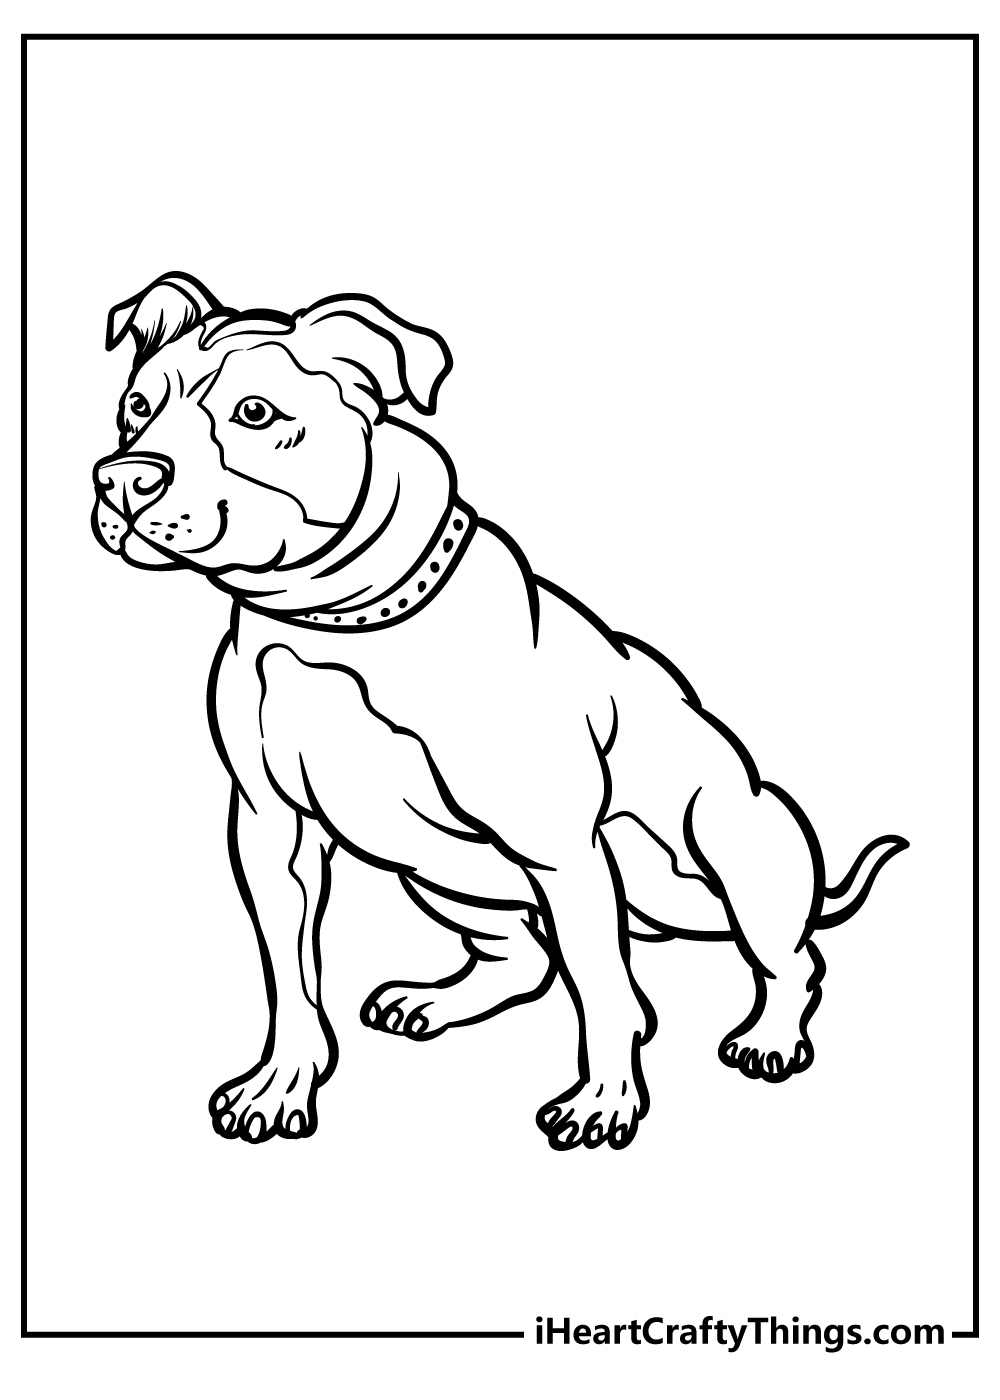 Pitbull Coloring Sheet for children free download